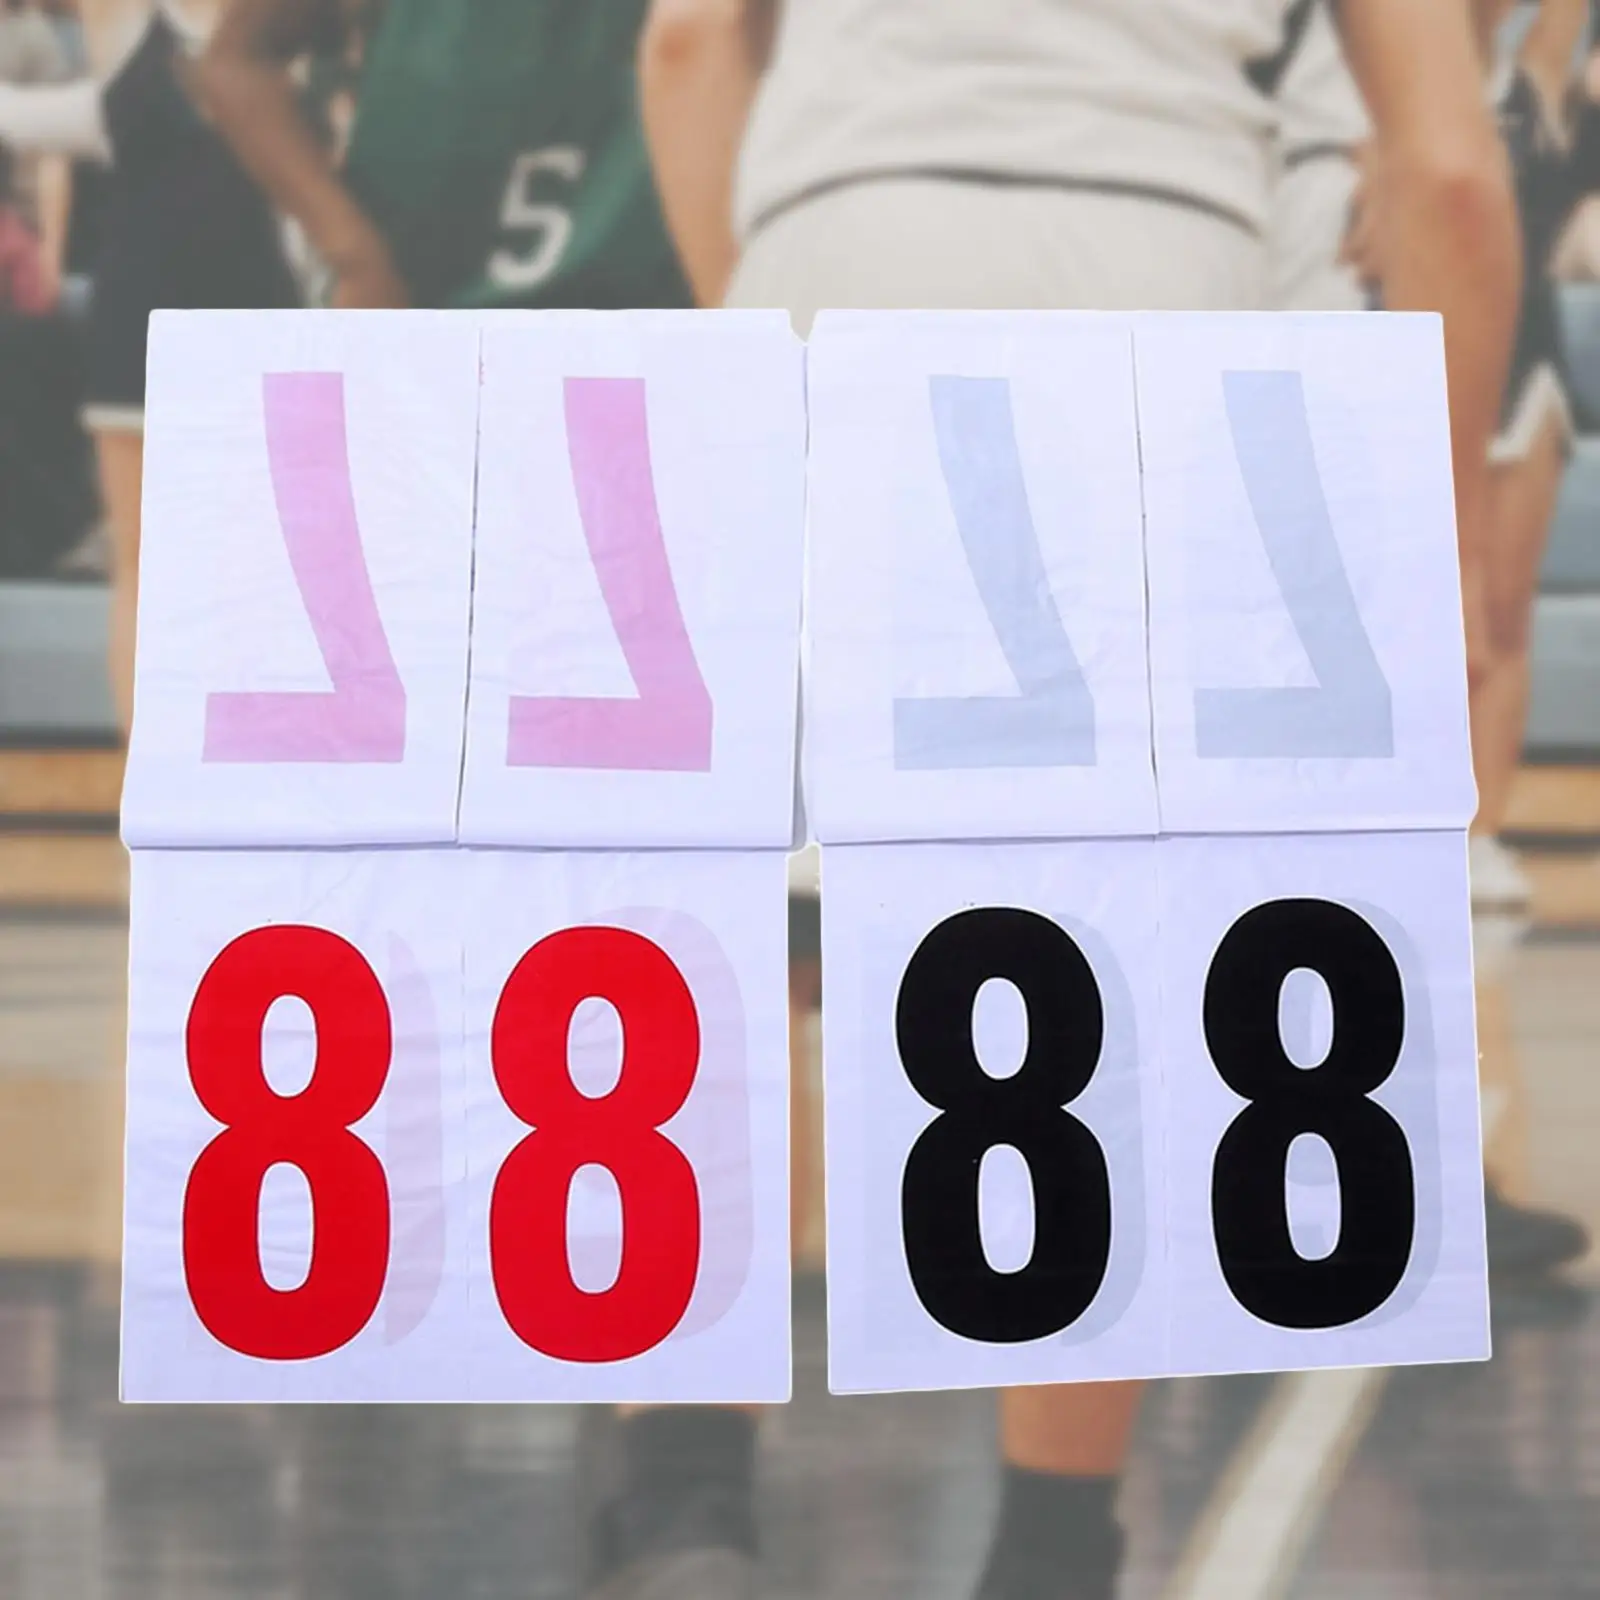 Sport Scoreboard 16.4in*16.4in Hanging Score Keeper 2 digits for Competitive Sports Indoor Outdoor Basketball Hockey Volleyball